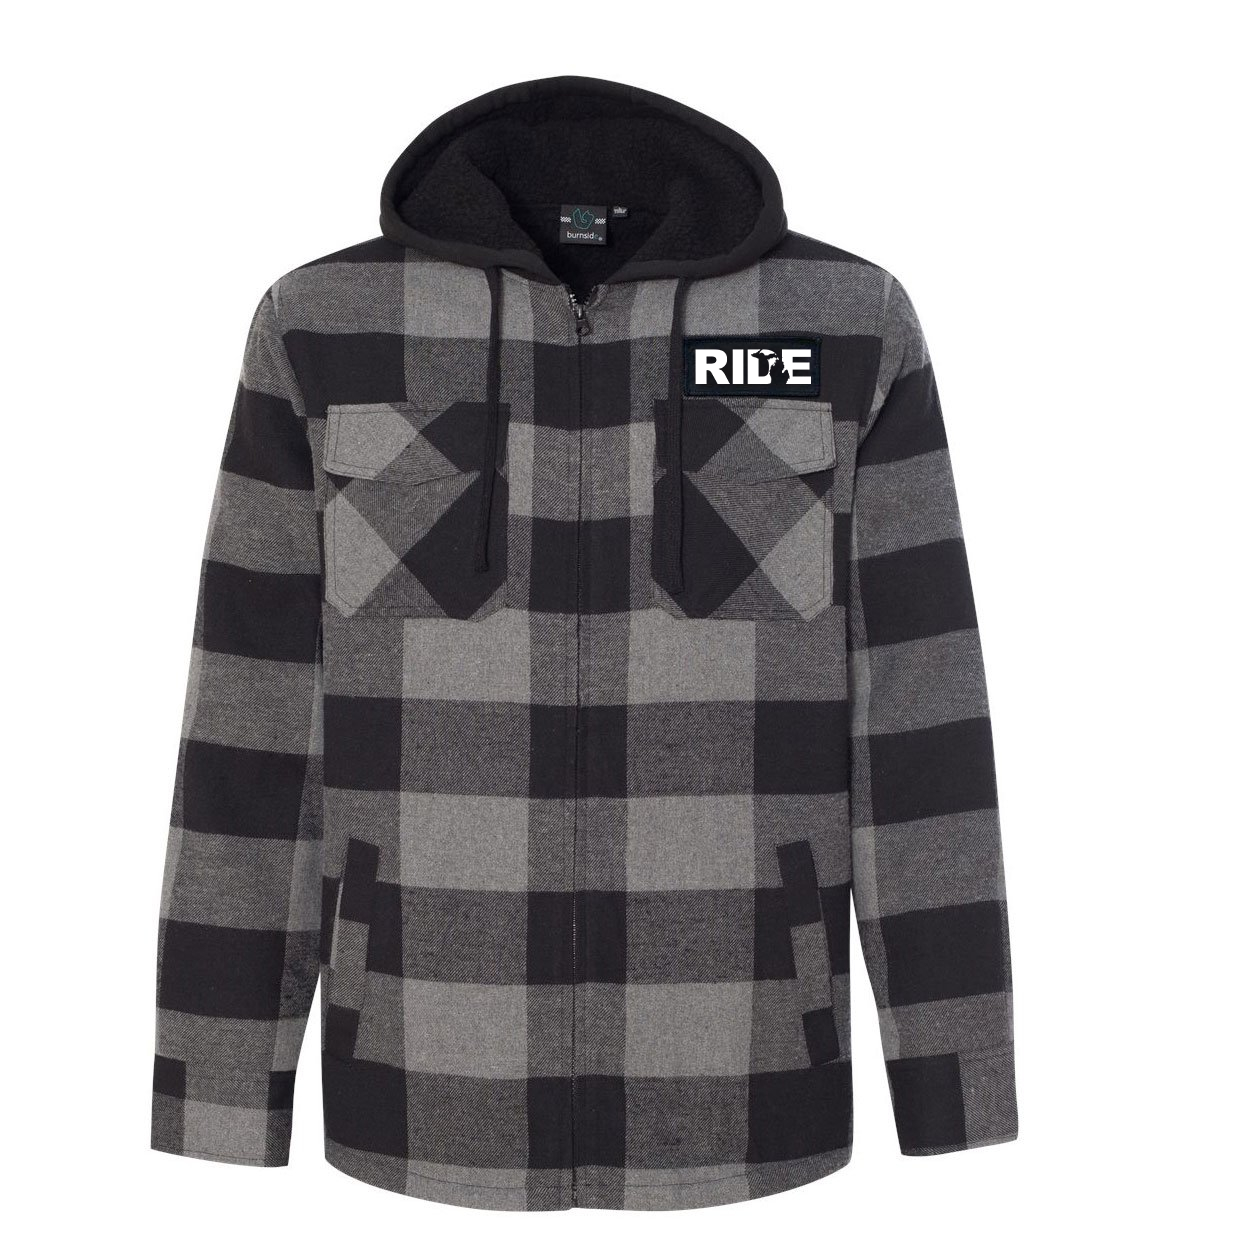 Ride Michigan Classic Unisex Full Zip Woven Patch Hooded Flannel Jacket Black/Gray (White Logo)